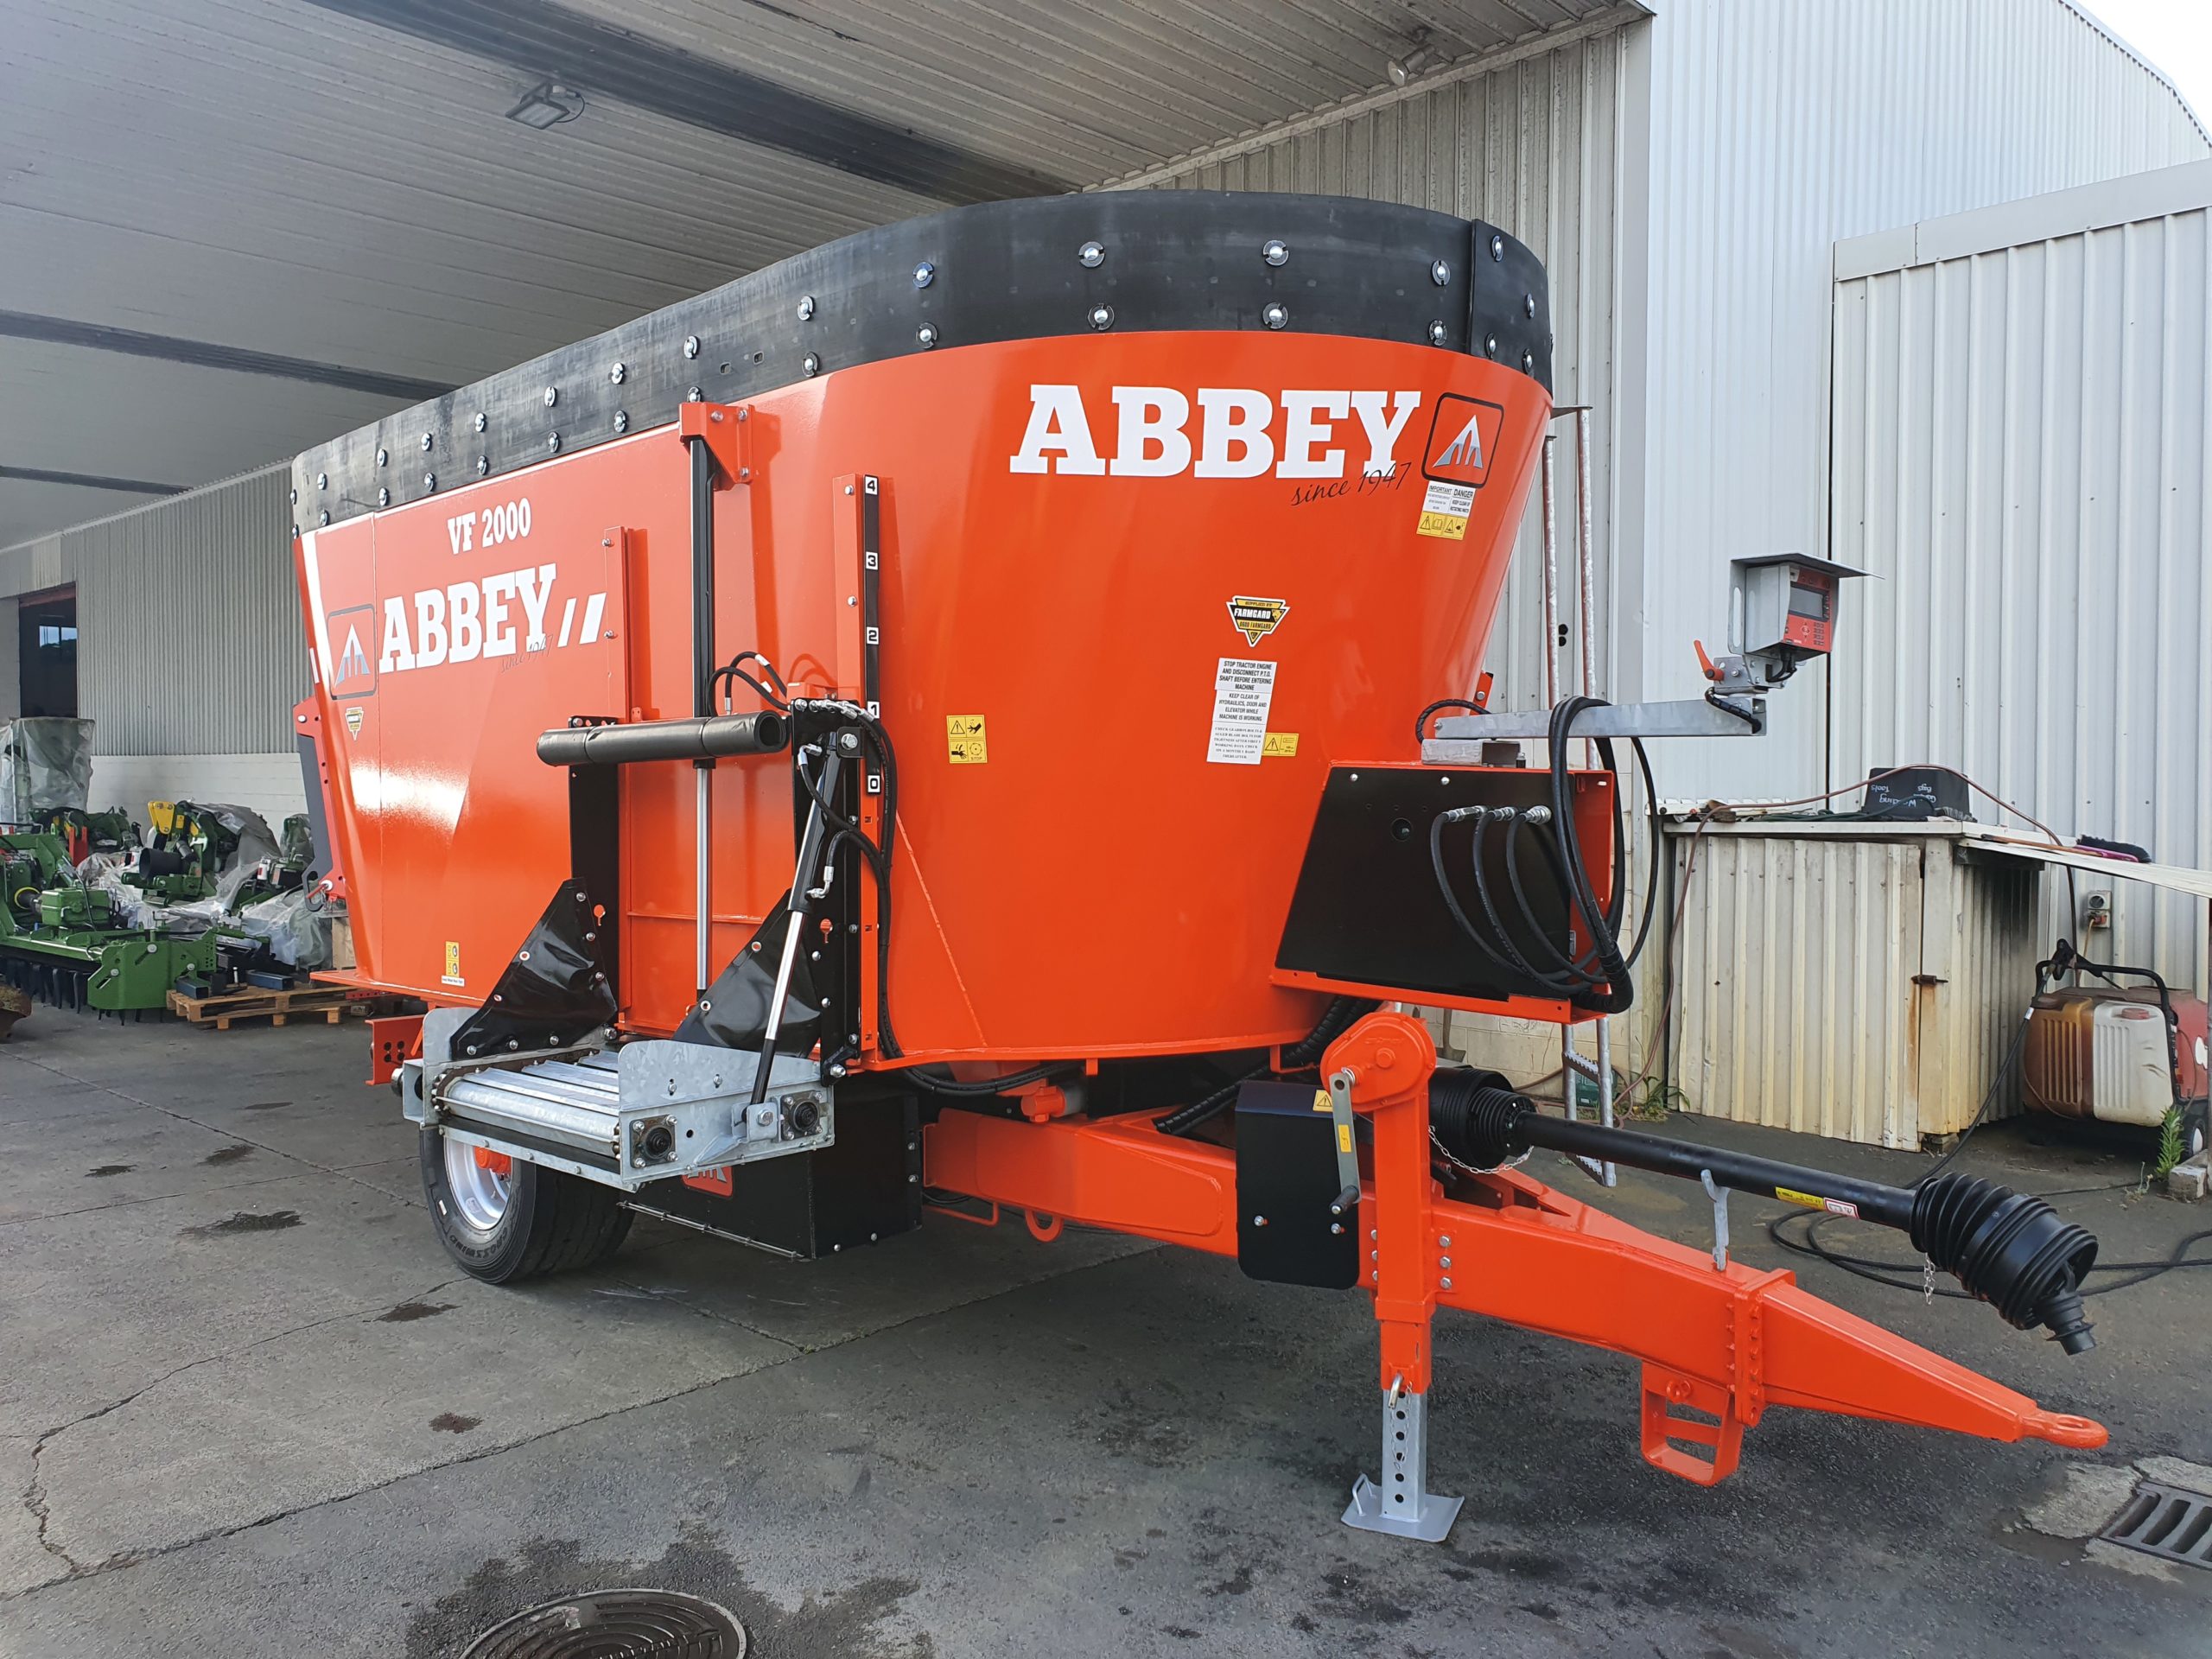 Abbey Single Auger Mixer Wagons